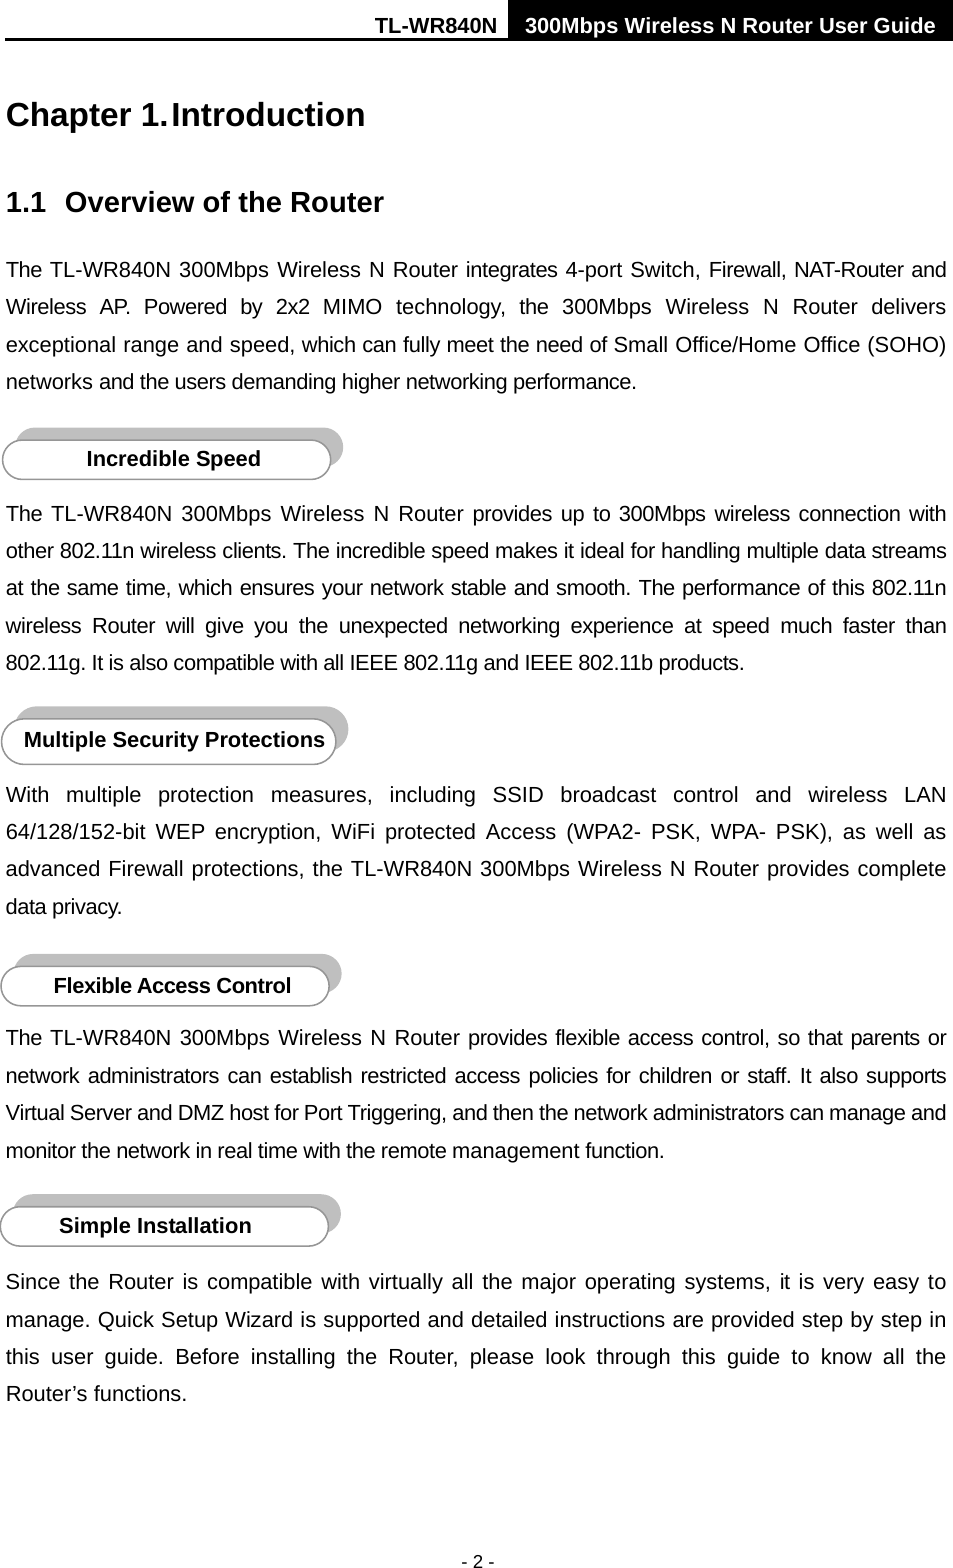 TL-WR840N 300Mbps Wireless N Router User Guide  - 2 - Chapter 1. Introduction 1.1 Overview of the Router The TL-WR840N 300Mbps Wireless N Router integrates 4-port Switch, Firewall, NAT-Router and Wireless AP. Powered by  2x2  MIMO technology,  the 300Mbps  Wireless N Router delivers exceptional range and speed, which can fully meet the need of Small Office/Home Office (SOHO) networks and the users demanding higher networking performance.  The TL-WR840N 300Mbps  Wireless N Router provides up to 300Mbps wireless connection with other 802.11n wireless clients. The incredible speed makes it ideal for handling multiple data streams at the same time, which ensures your network stable and smooth. The performance of this 802.11n wireless  Router will give you the unexpected networking experience at speed much faster than 802.11g. It is also compatible with all IEEE 802.11g and IEEE 802.11b products.  With multiple protection measures, including SSID broadcast control and wireless LAN 64/128/152-bit WEP encryption,  WiFi protected Access (WPA2-  PSK, WPA-  PSK), as well as advanced Firewall protections, the TL-WR840N 300Mbps Wireless N Router provides complete data privacy.    The TL-WR840N 300Mbps Wireless N Router provides flexible access control, so that parents or network administrators can establish restricted access policies for children or staff. It also supports Virtual Server and DMZ host for Port Triggering, and then the network administrators can manage and monitor the network in real time with the remote management function.    Since the Router is compatible with virtually all the major operating systems, it is very easy to manage. Quick Setup Wizard is supported and detailed instructions are provided step by step in this user guide.  Before installing the Router, please look through this guide to know all the Router’s functions. Simple Installation Flexible Access Control  Multiple Security Protections Incredible Speed  